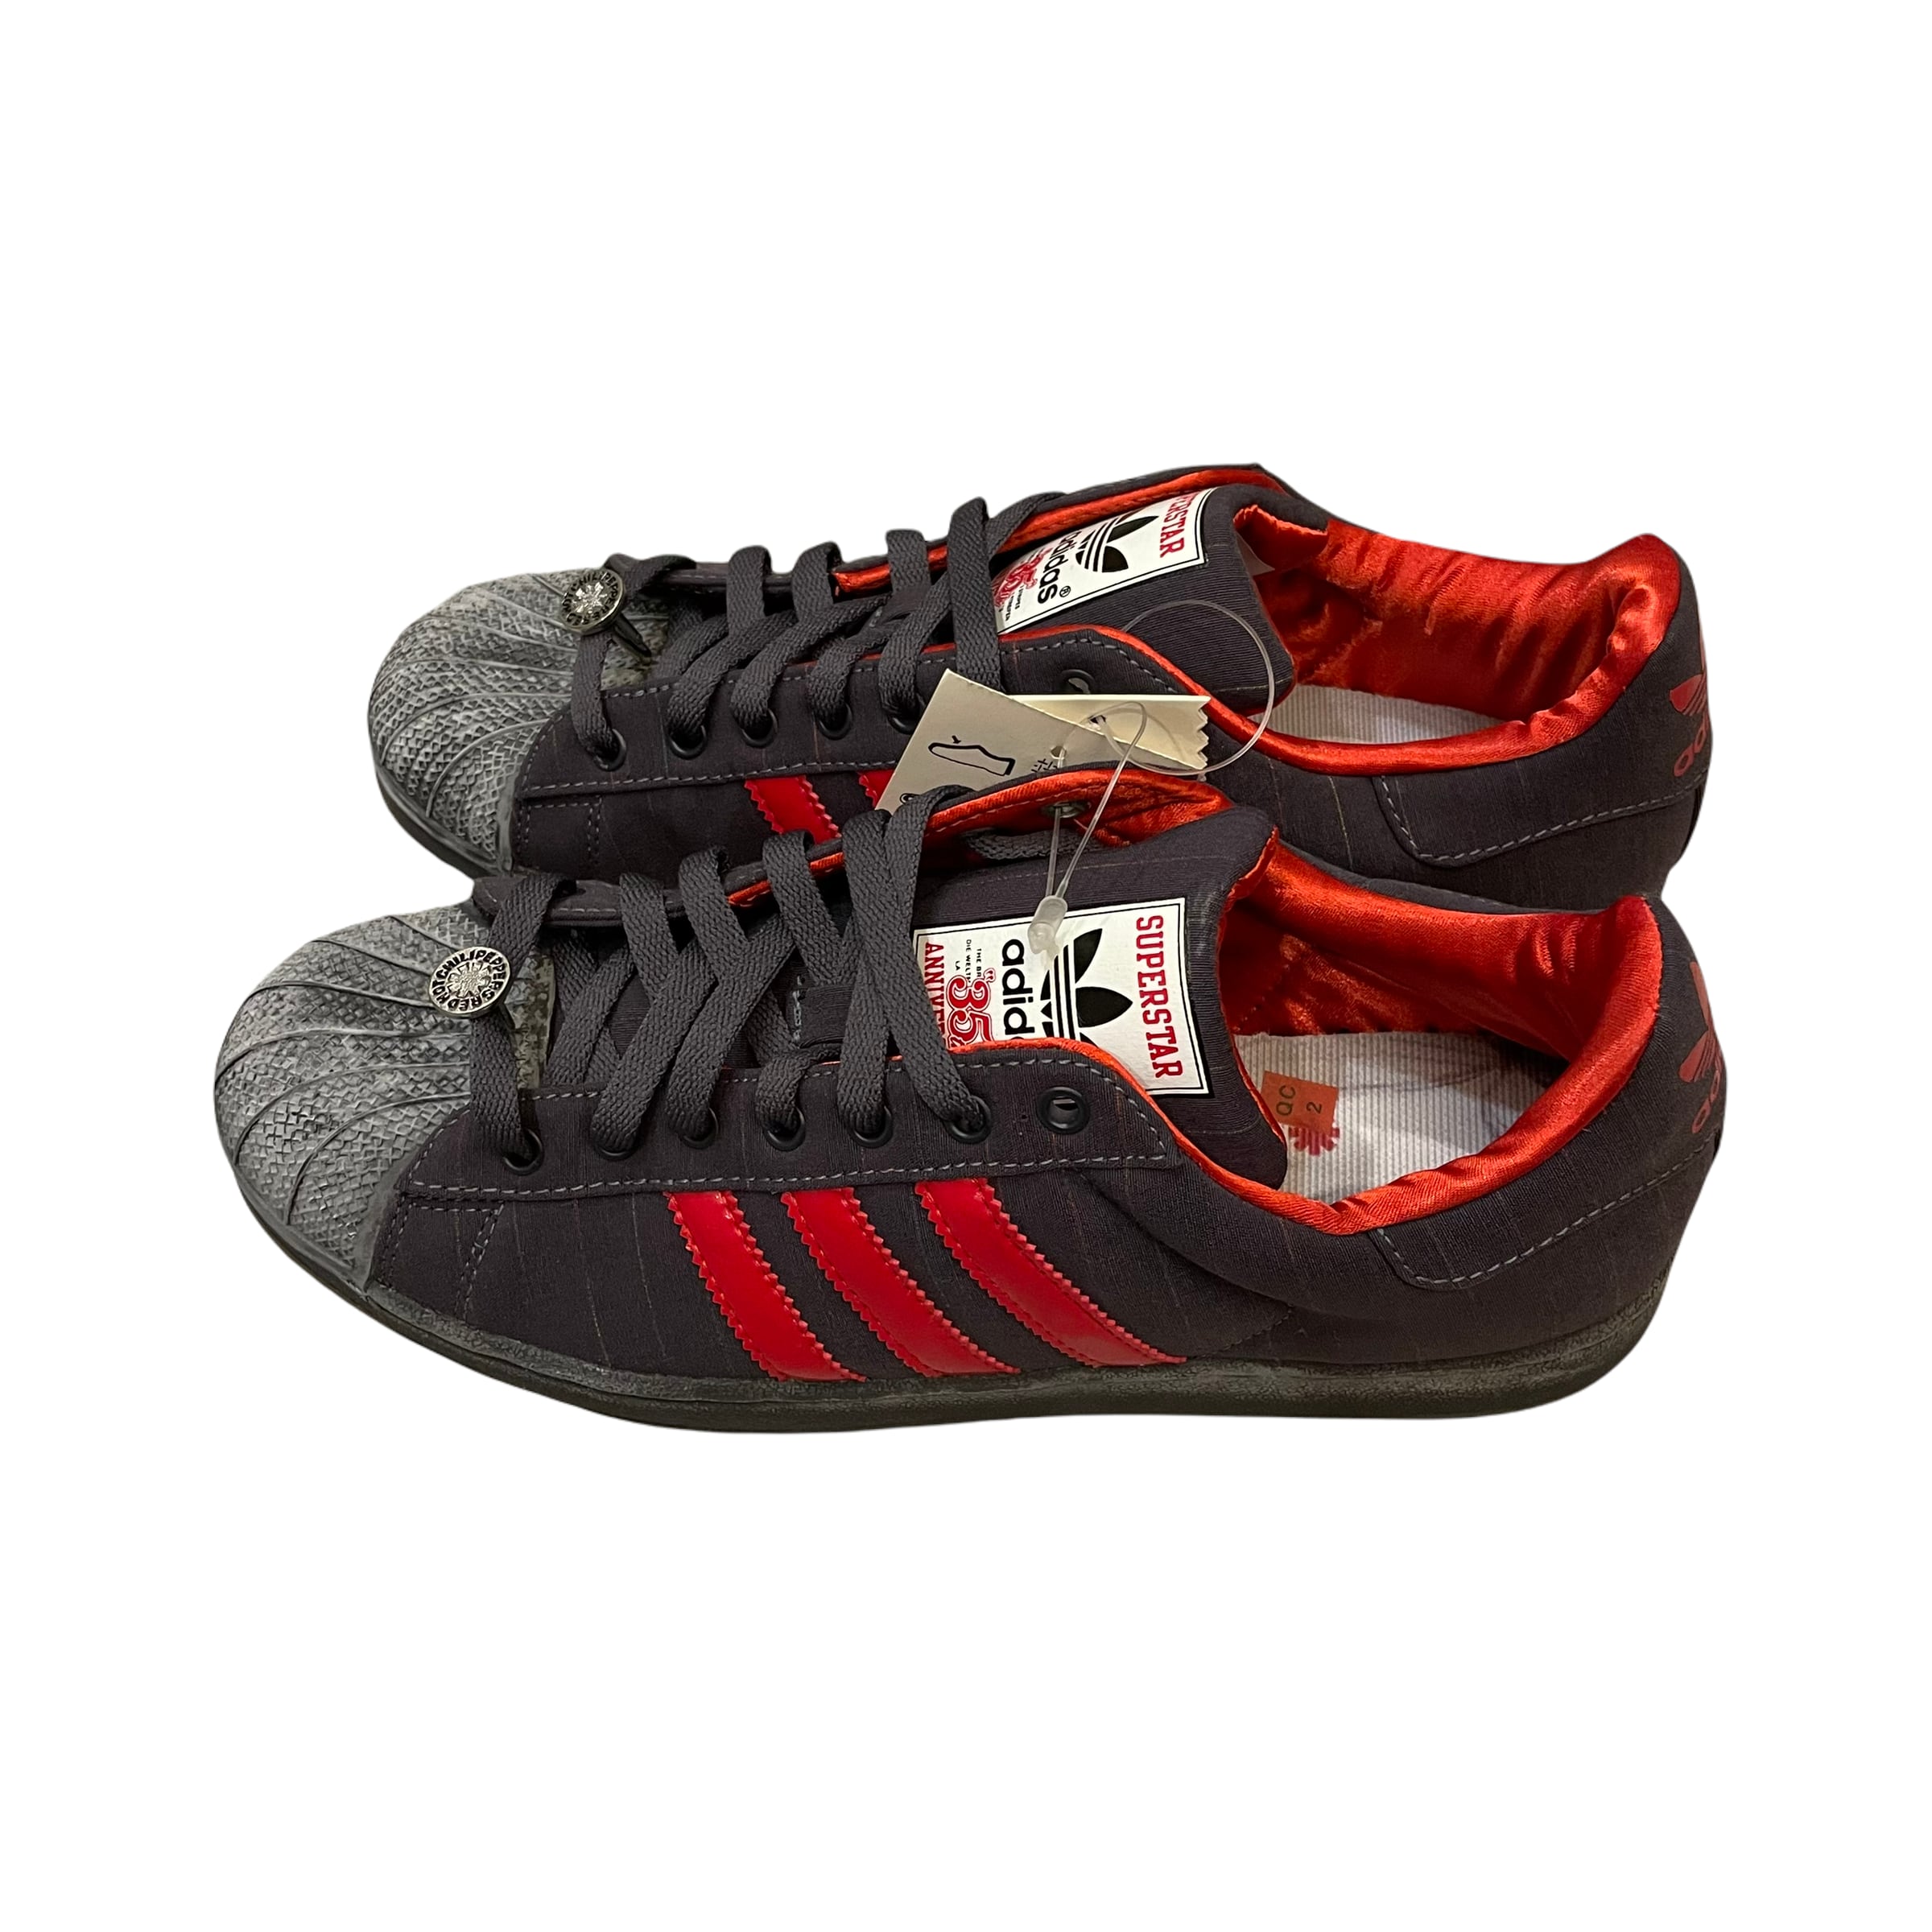 adidas superstar 35th anniversary × RED HOT CHILI PEPPERS | THE SHOP URL  powered by BASE